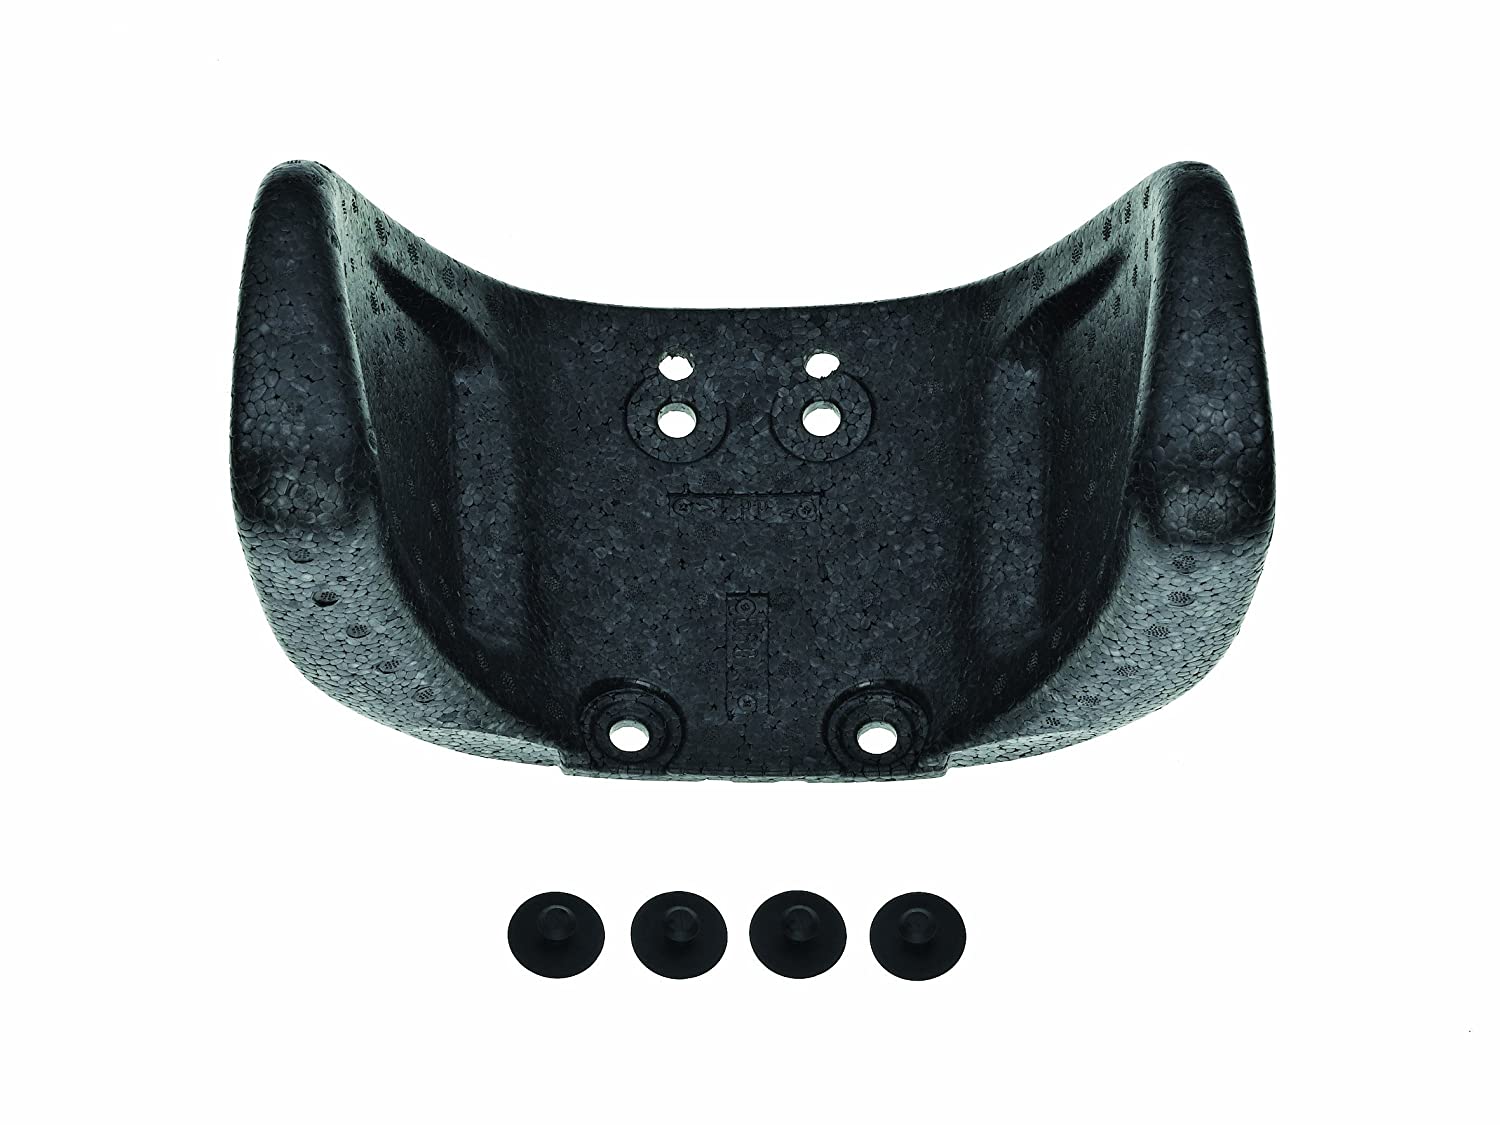 Britax Römer Original Accessories I Damping Insert Headboard with Mounting Plugs for King Plus / Safefix Plus and TT